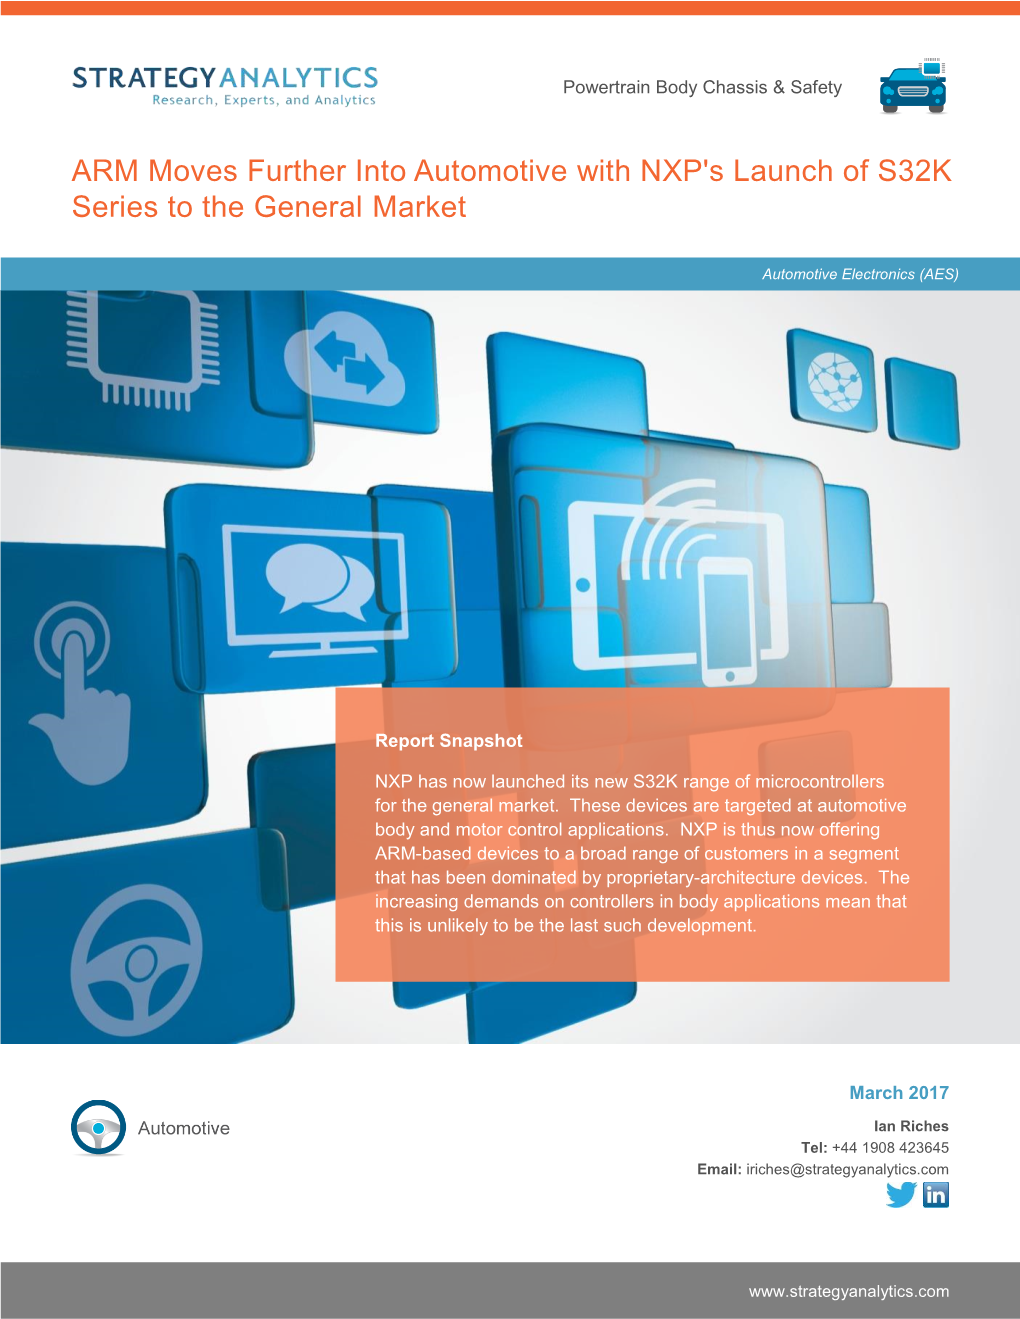 ARM Moves Further Into Automotive with NXP's Launch of S32K Series to the General Market